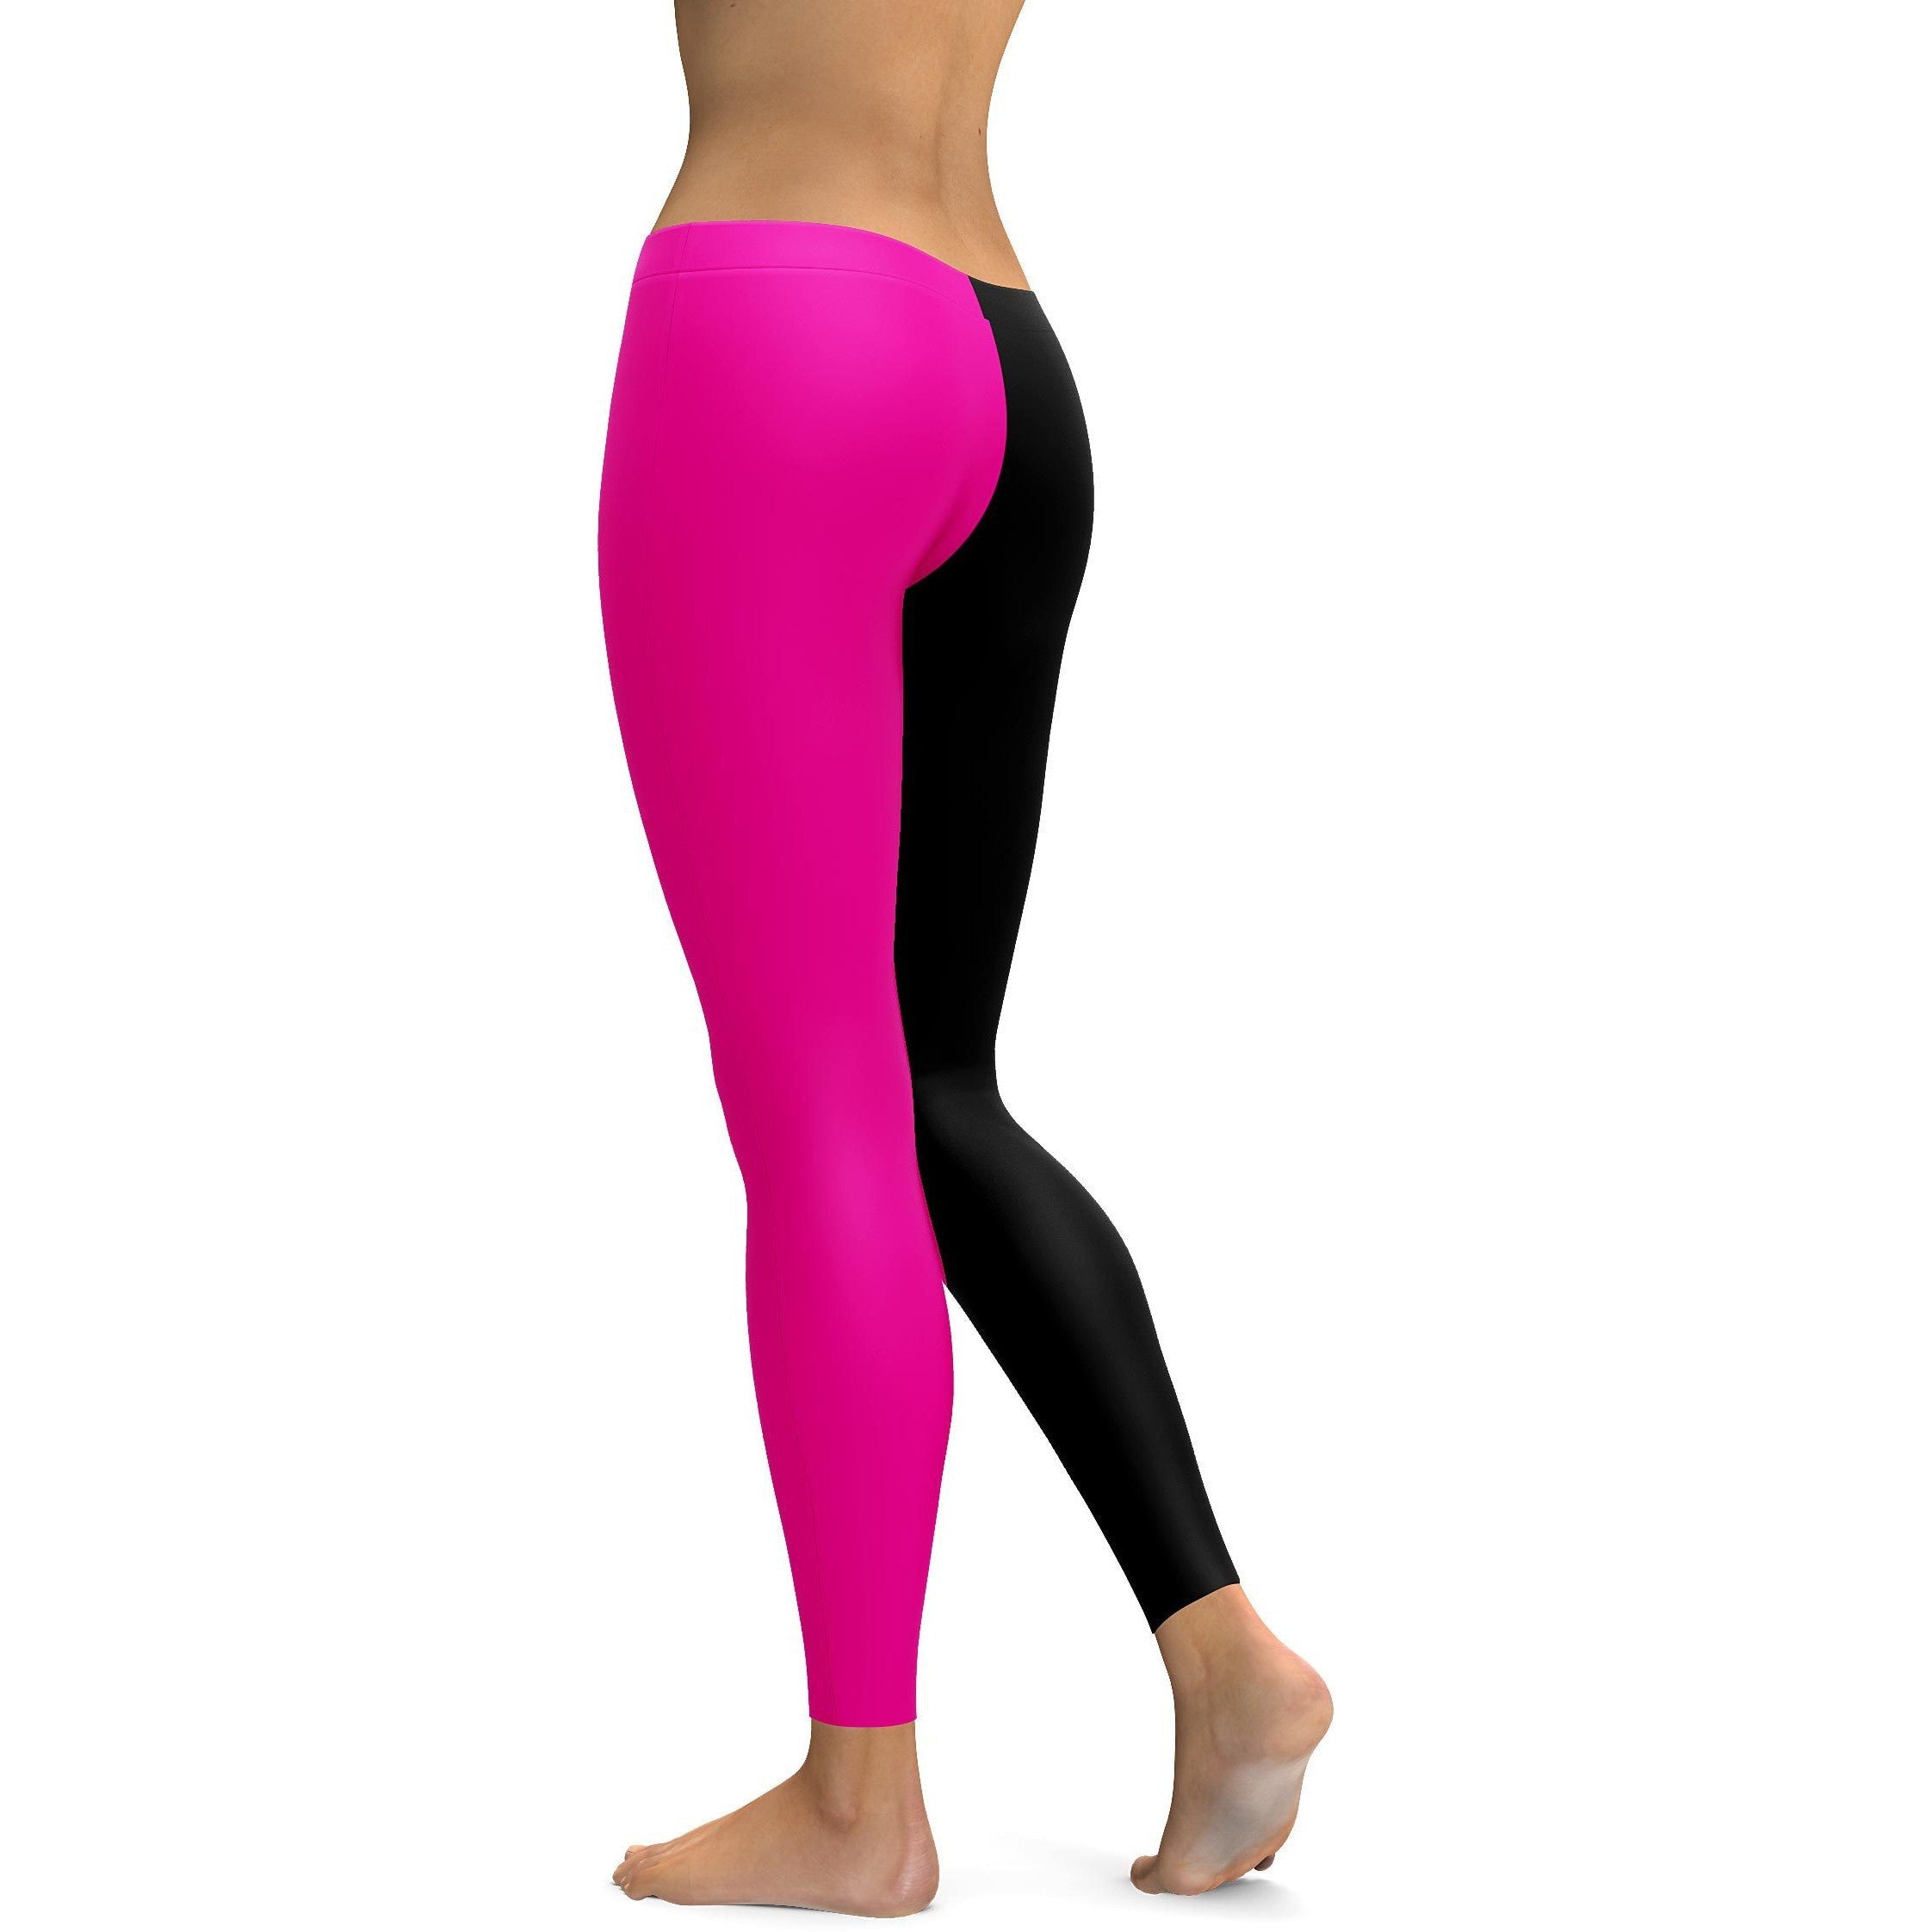 Pop Fit Leggings. NWT. Pink With Black On Leg. Size 2X